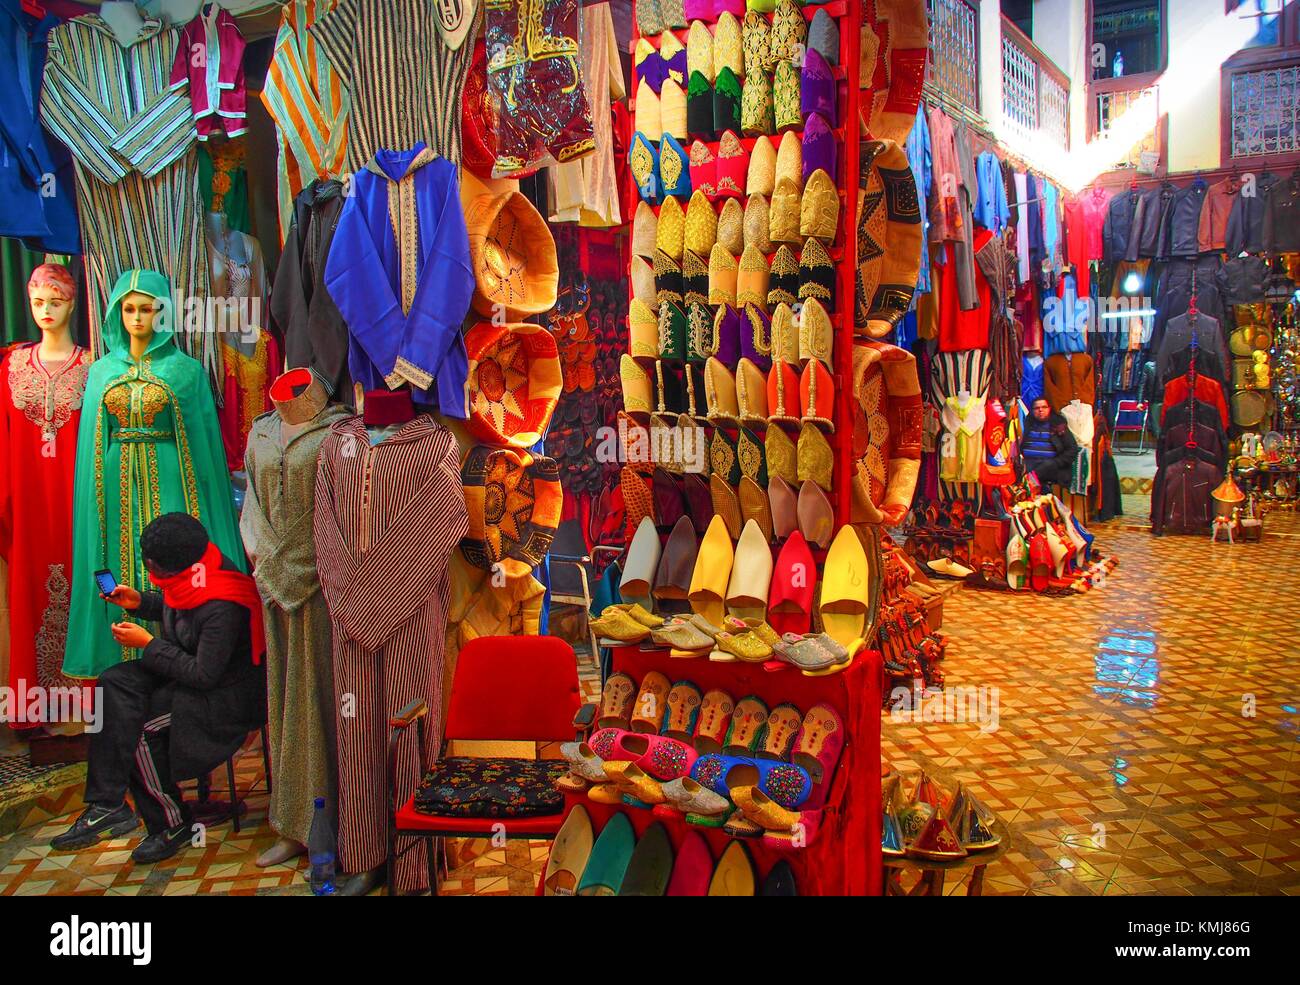 Morocco, Fes, in one of the many souk of the ""Medina"" (old part) of Fes. Stock Photo